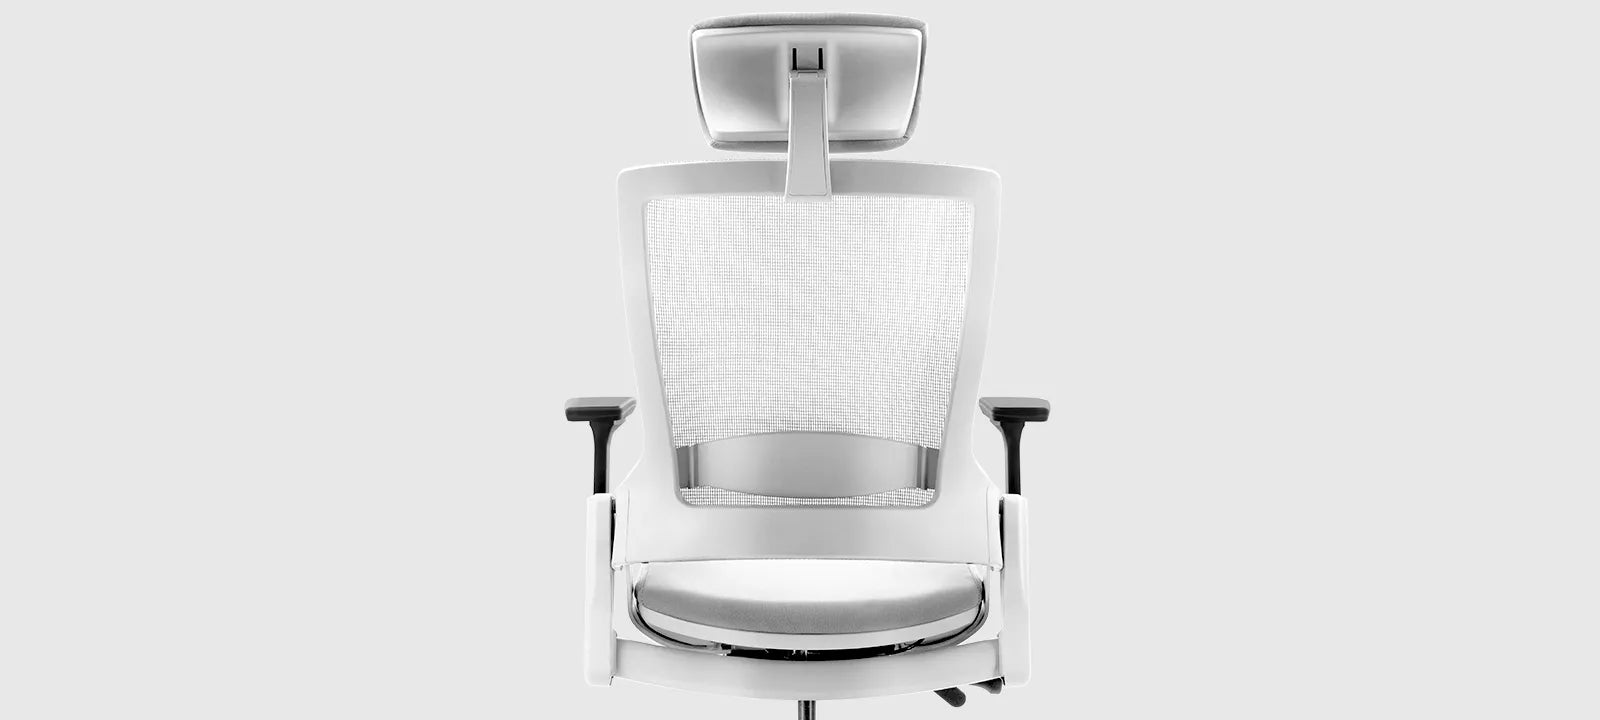 Detailed view of the Flujo Angulo Chair highlighting the adjustable headrest and mesh back design for optimal comfort.